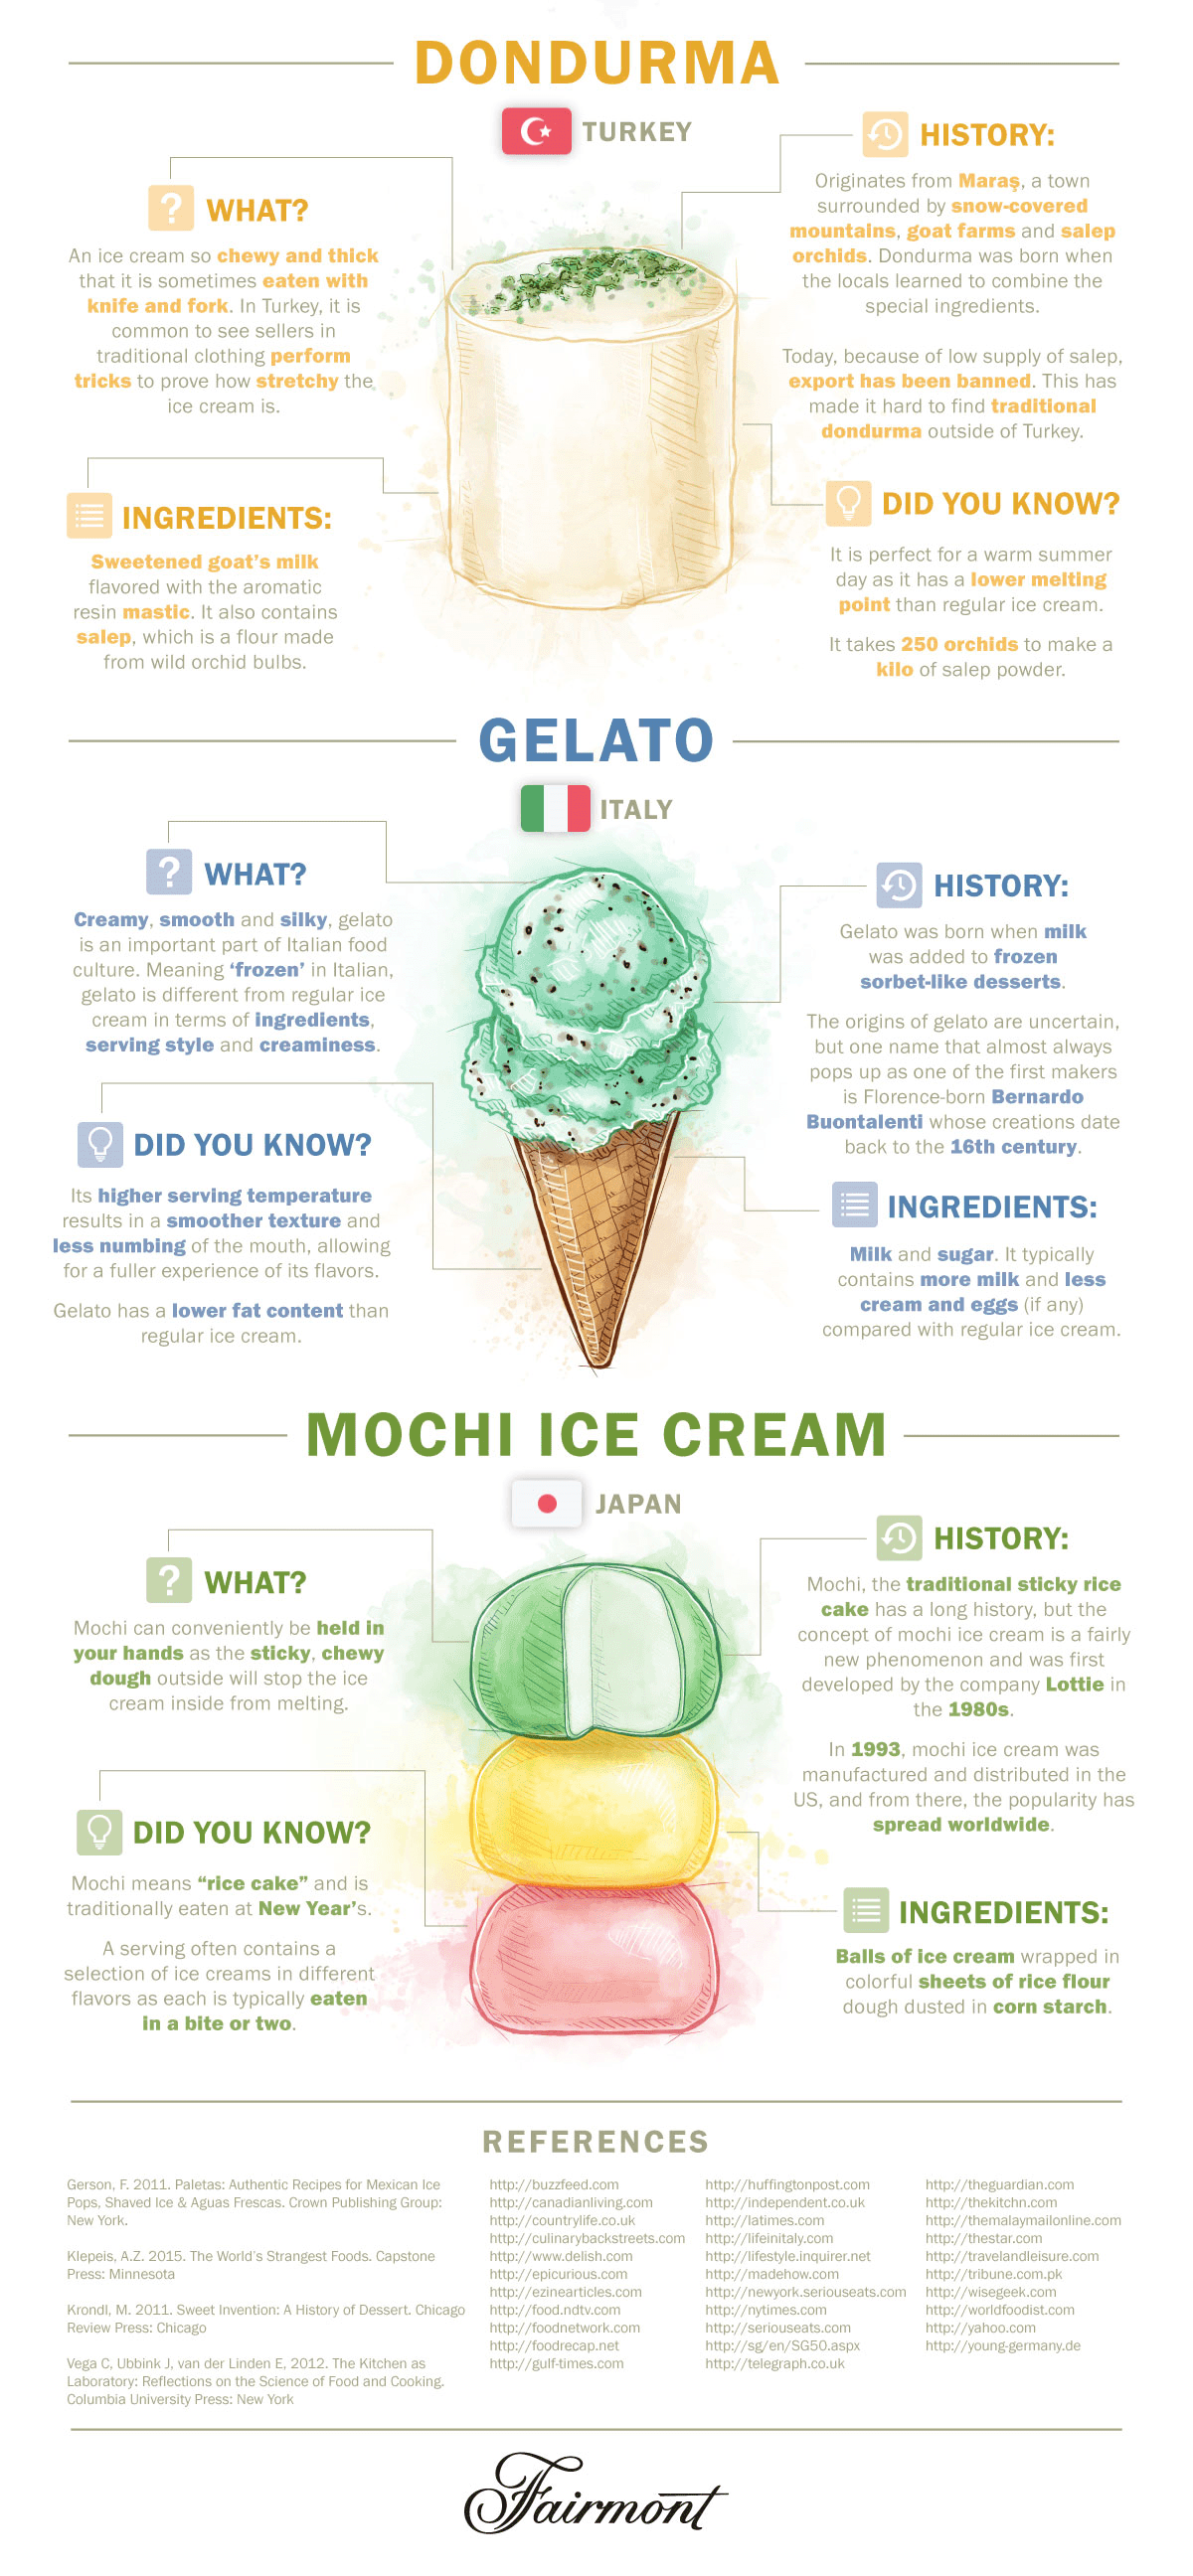 http://www.fairmont.com/infographics/most-popular-ice-cream/img/Ice_creams_3.png